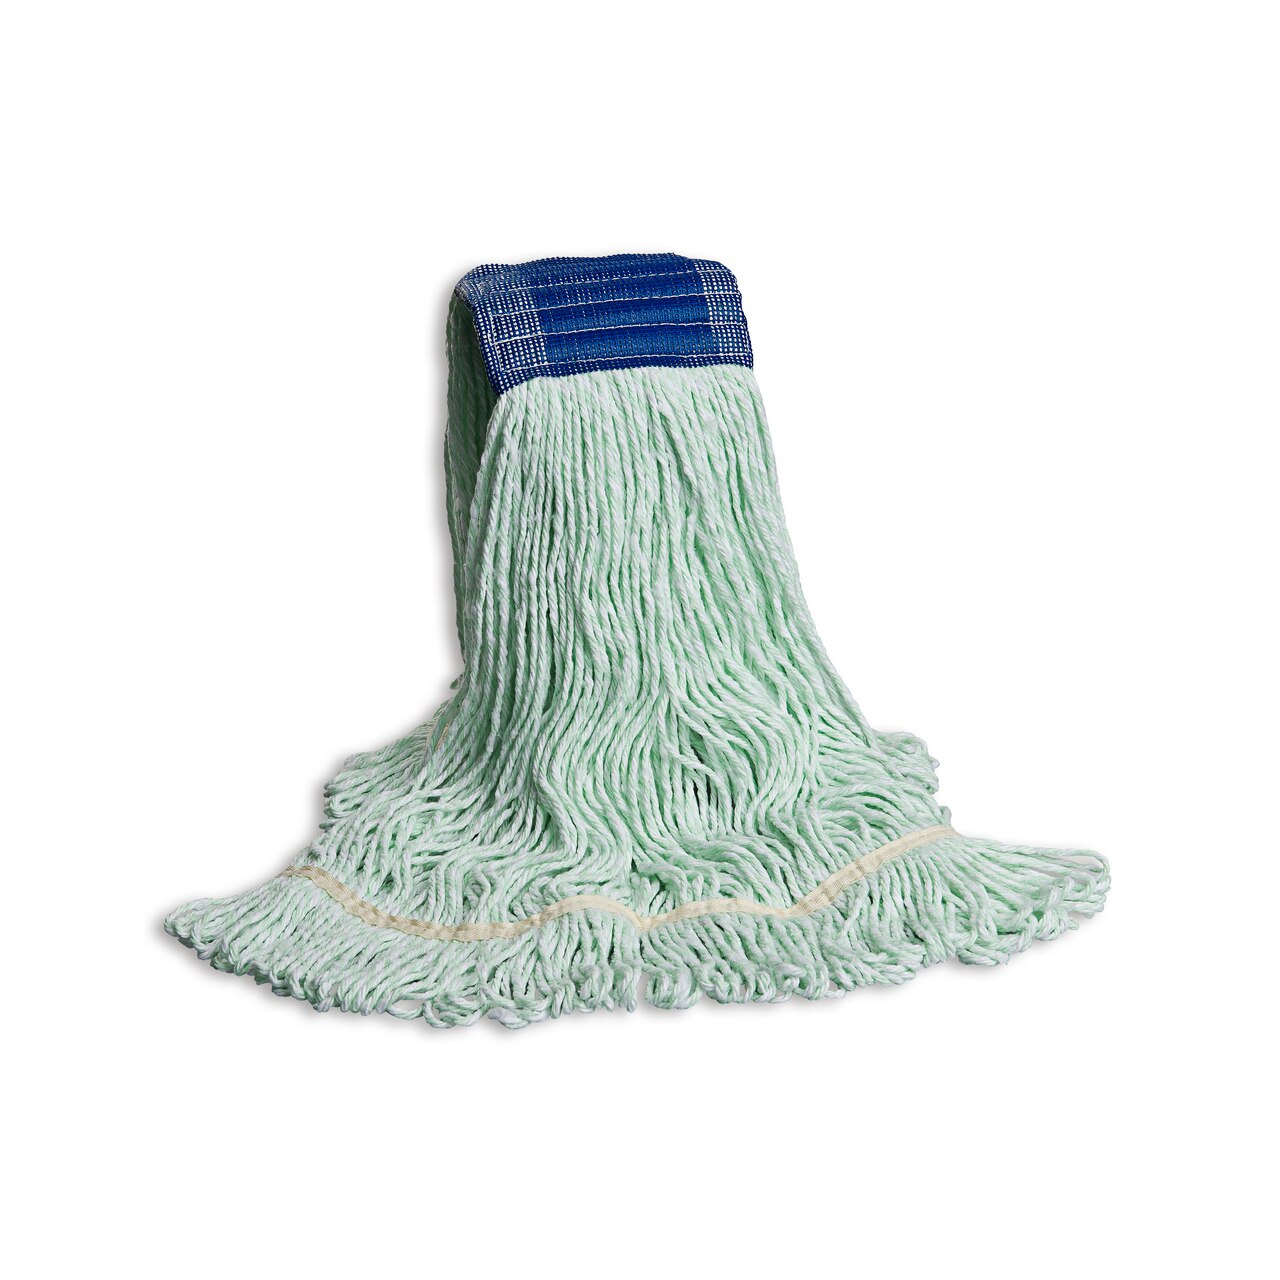 Recycled Pop Bottle Mop - Large Narrow Band